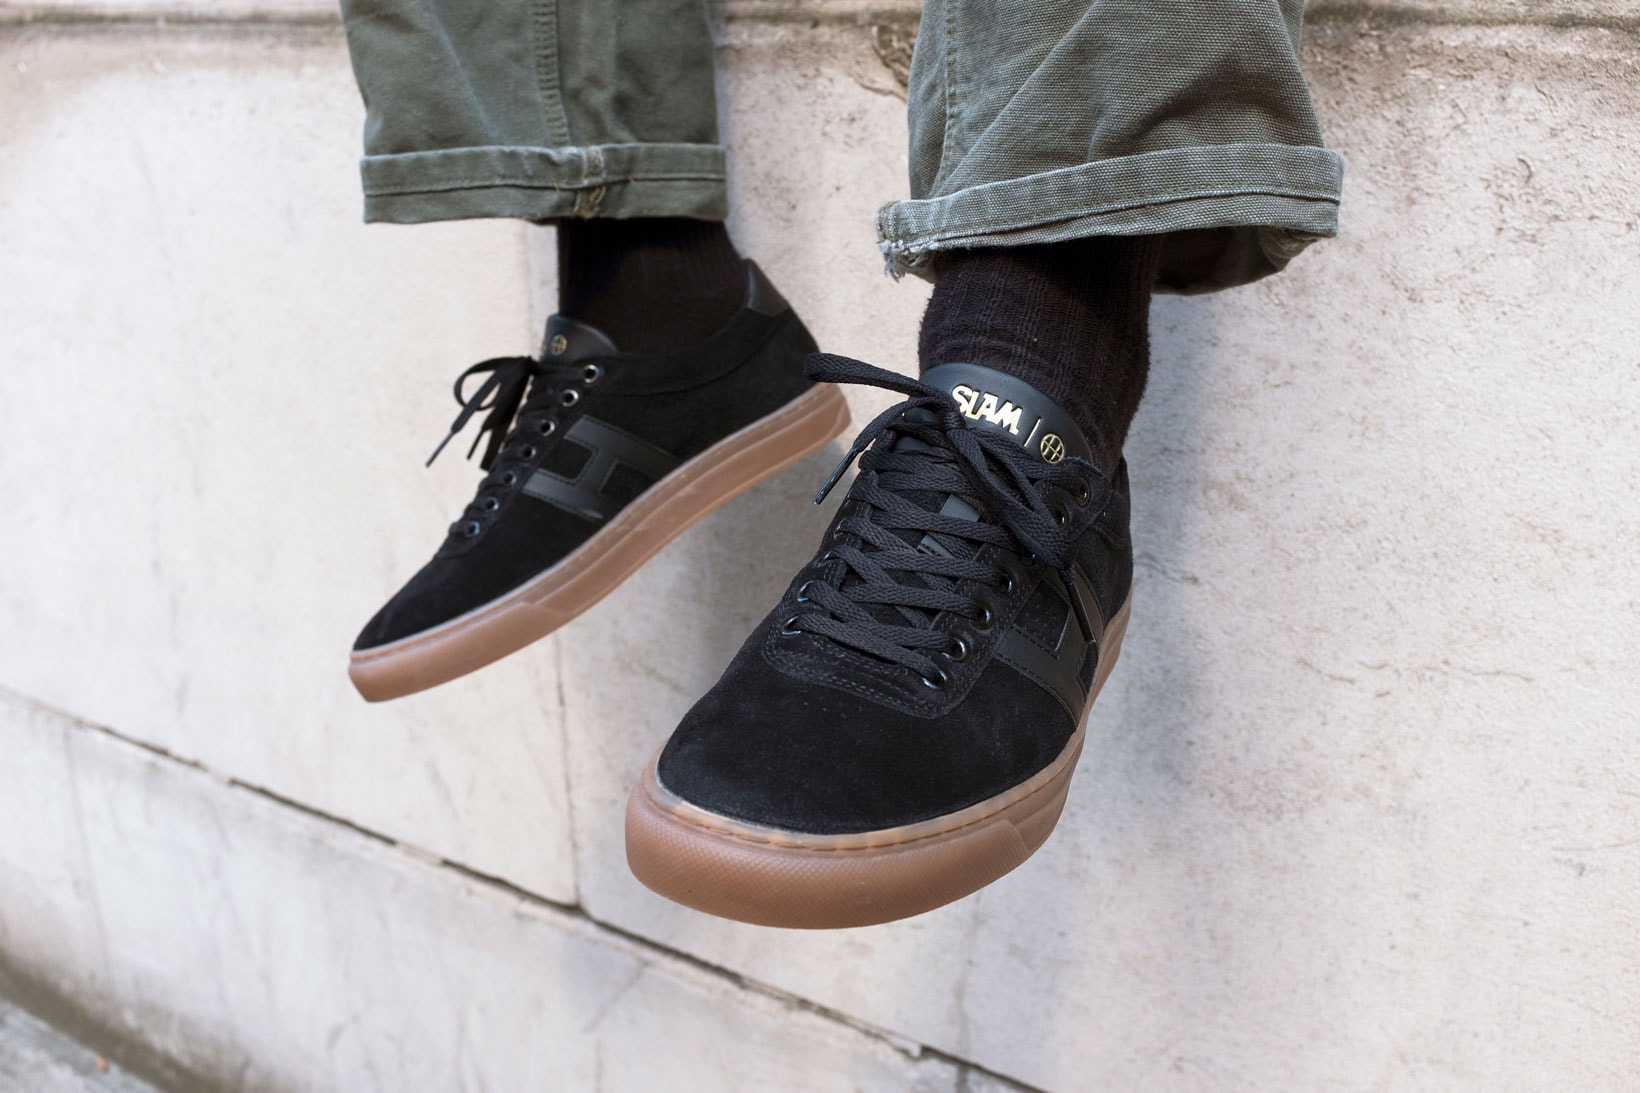 HUF x Slam City Skates 30th Anniversary Capsule Collection Sneakers